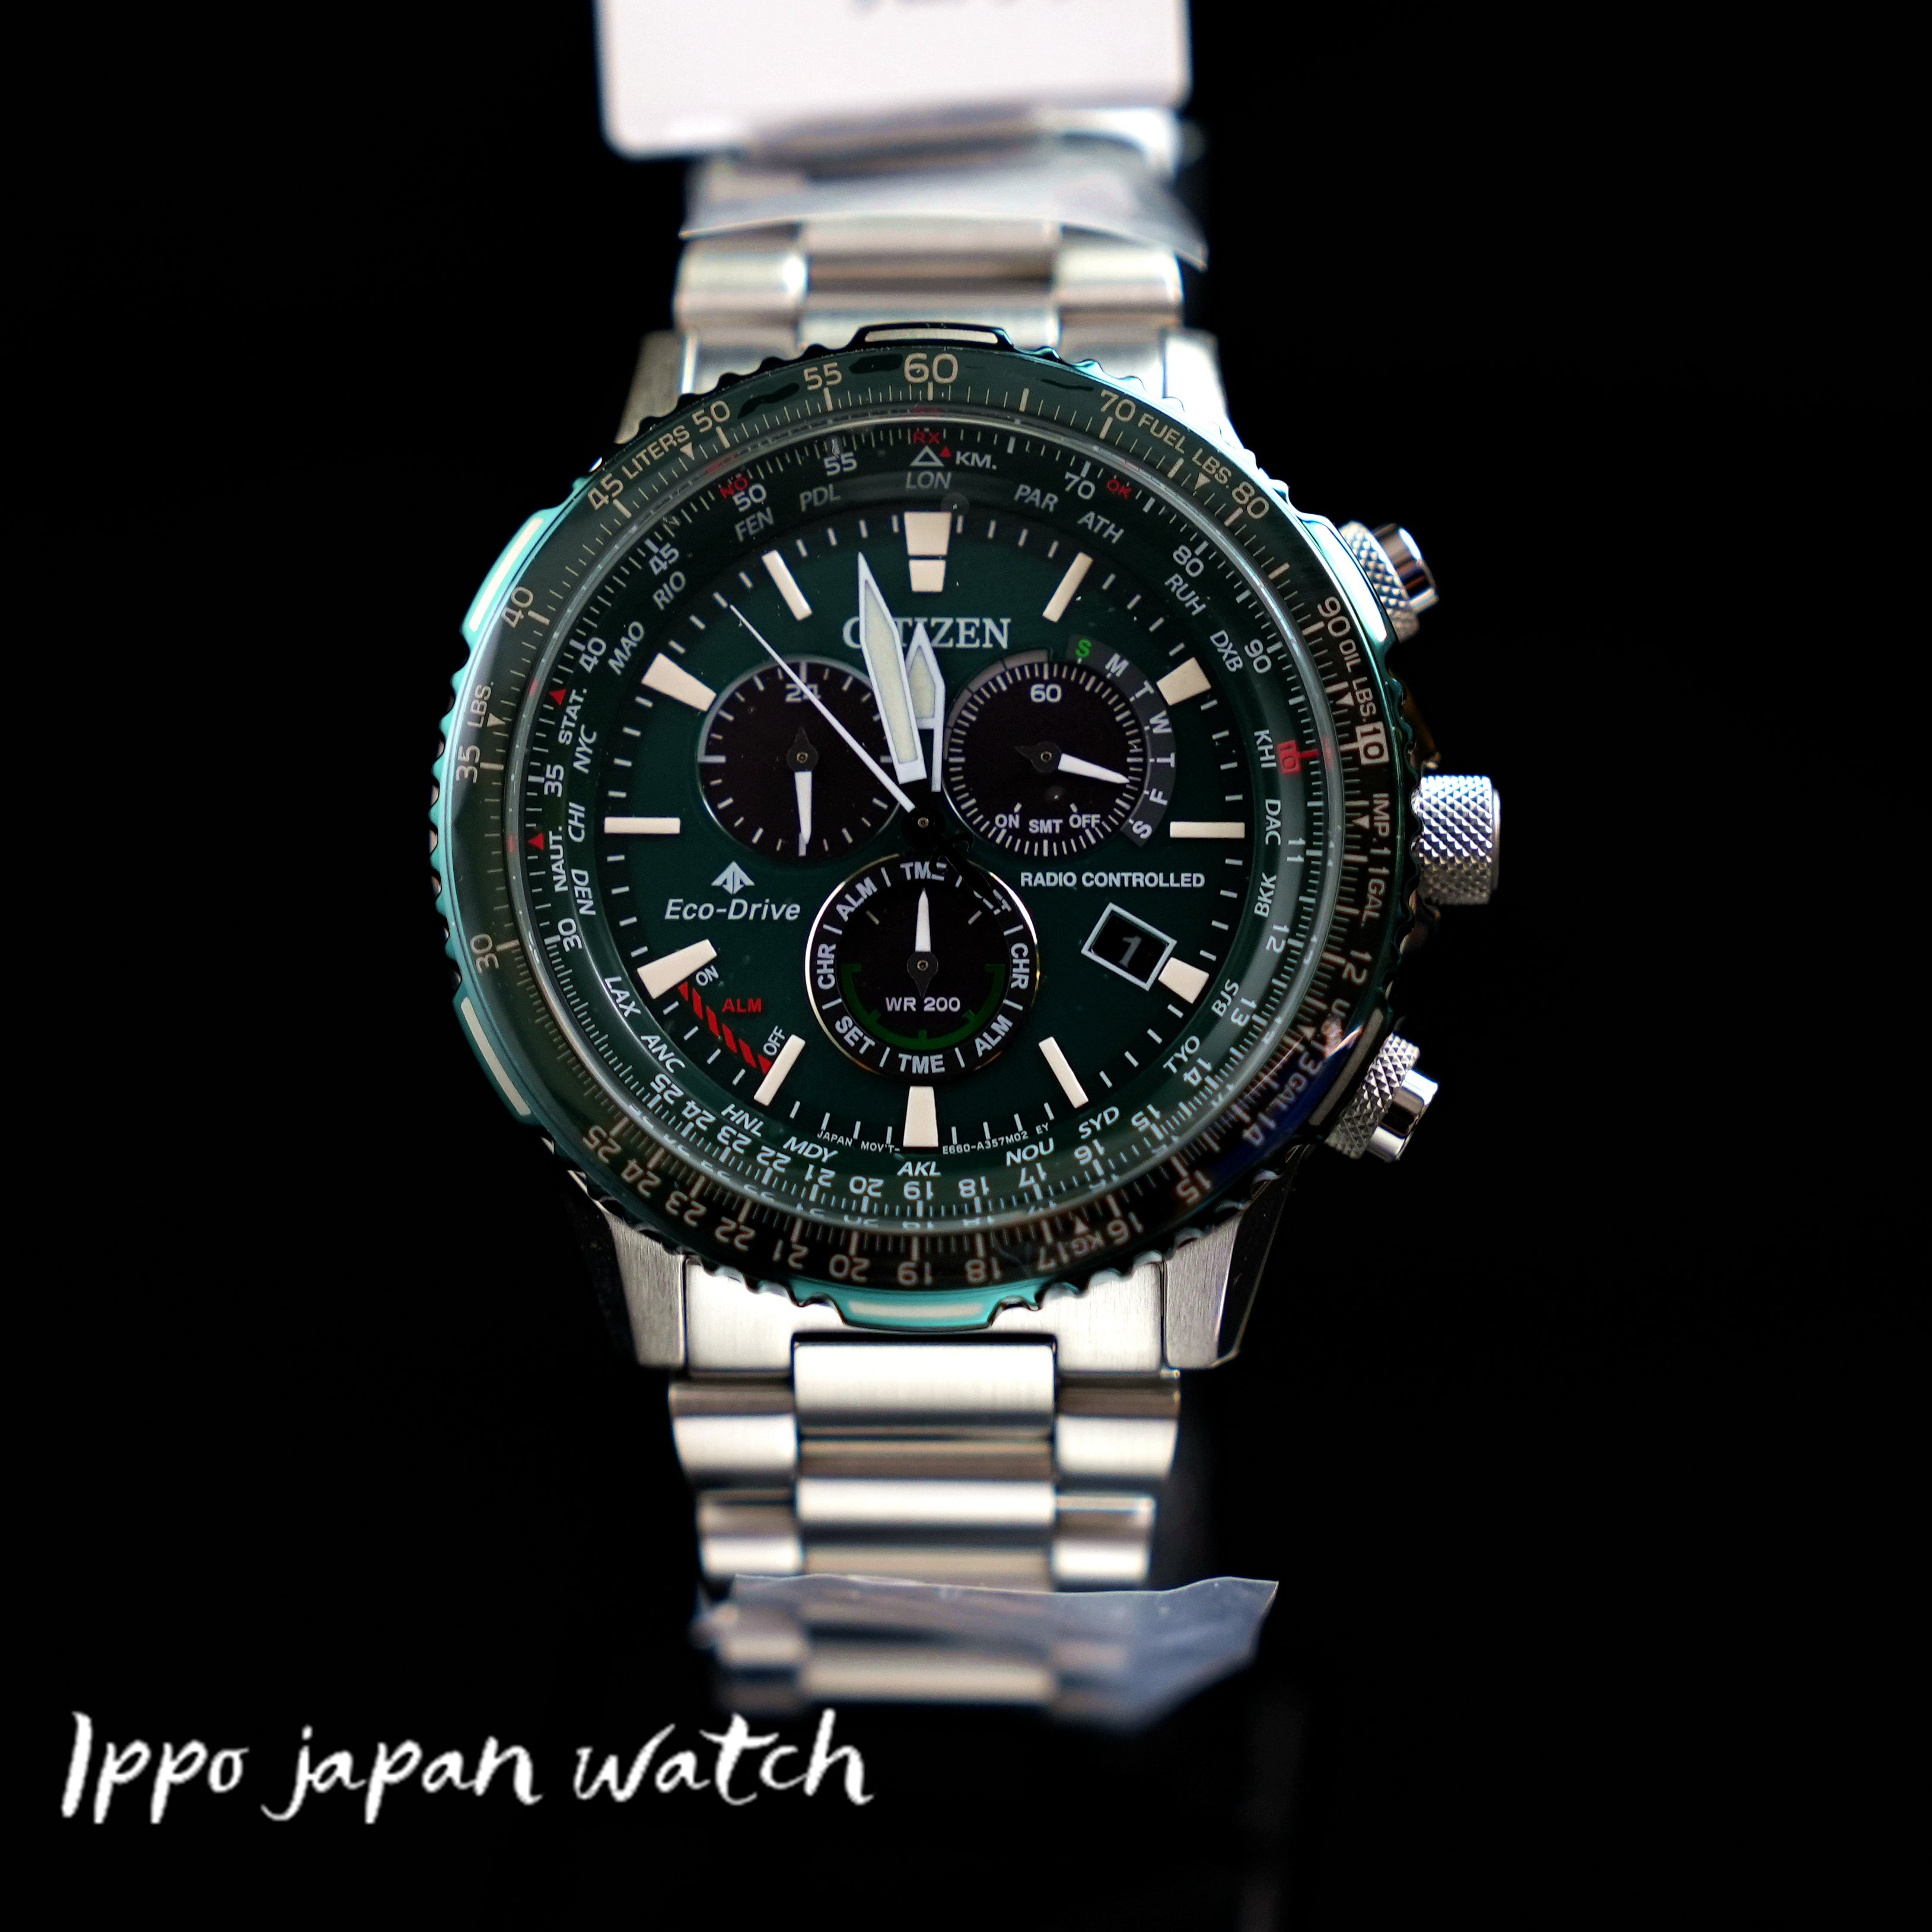 WATCH 20 photovoltaic eco-drive CITIZEN JAPAN – stainless CB5004-59W promaster IPPO watch